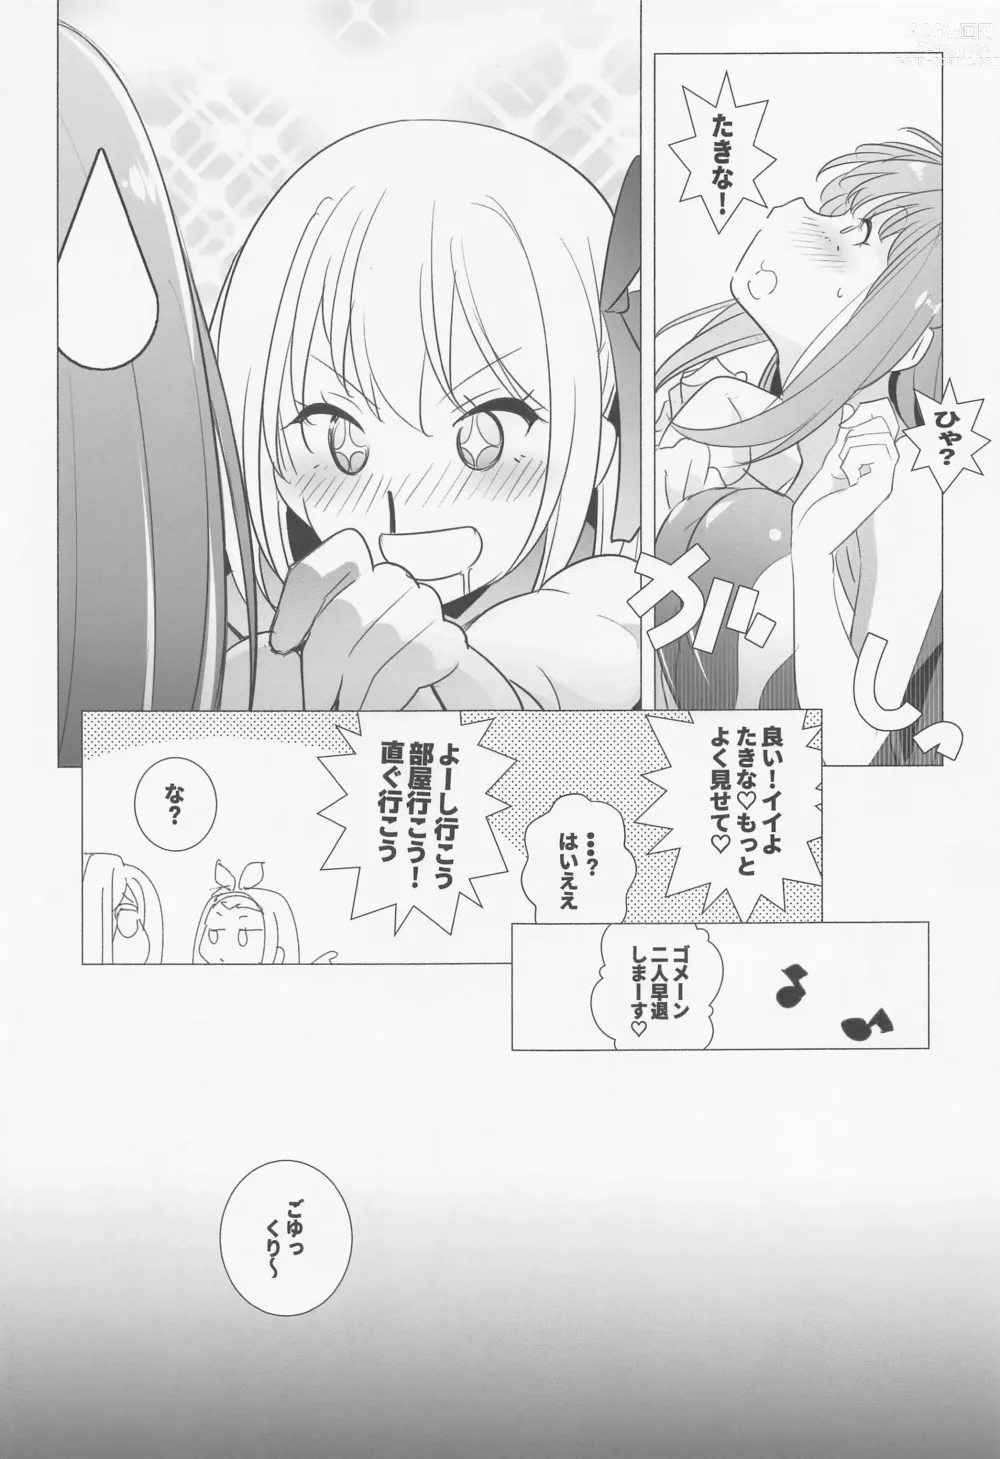 Page 6 of doujinshi INTER MISSION